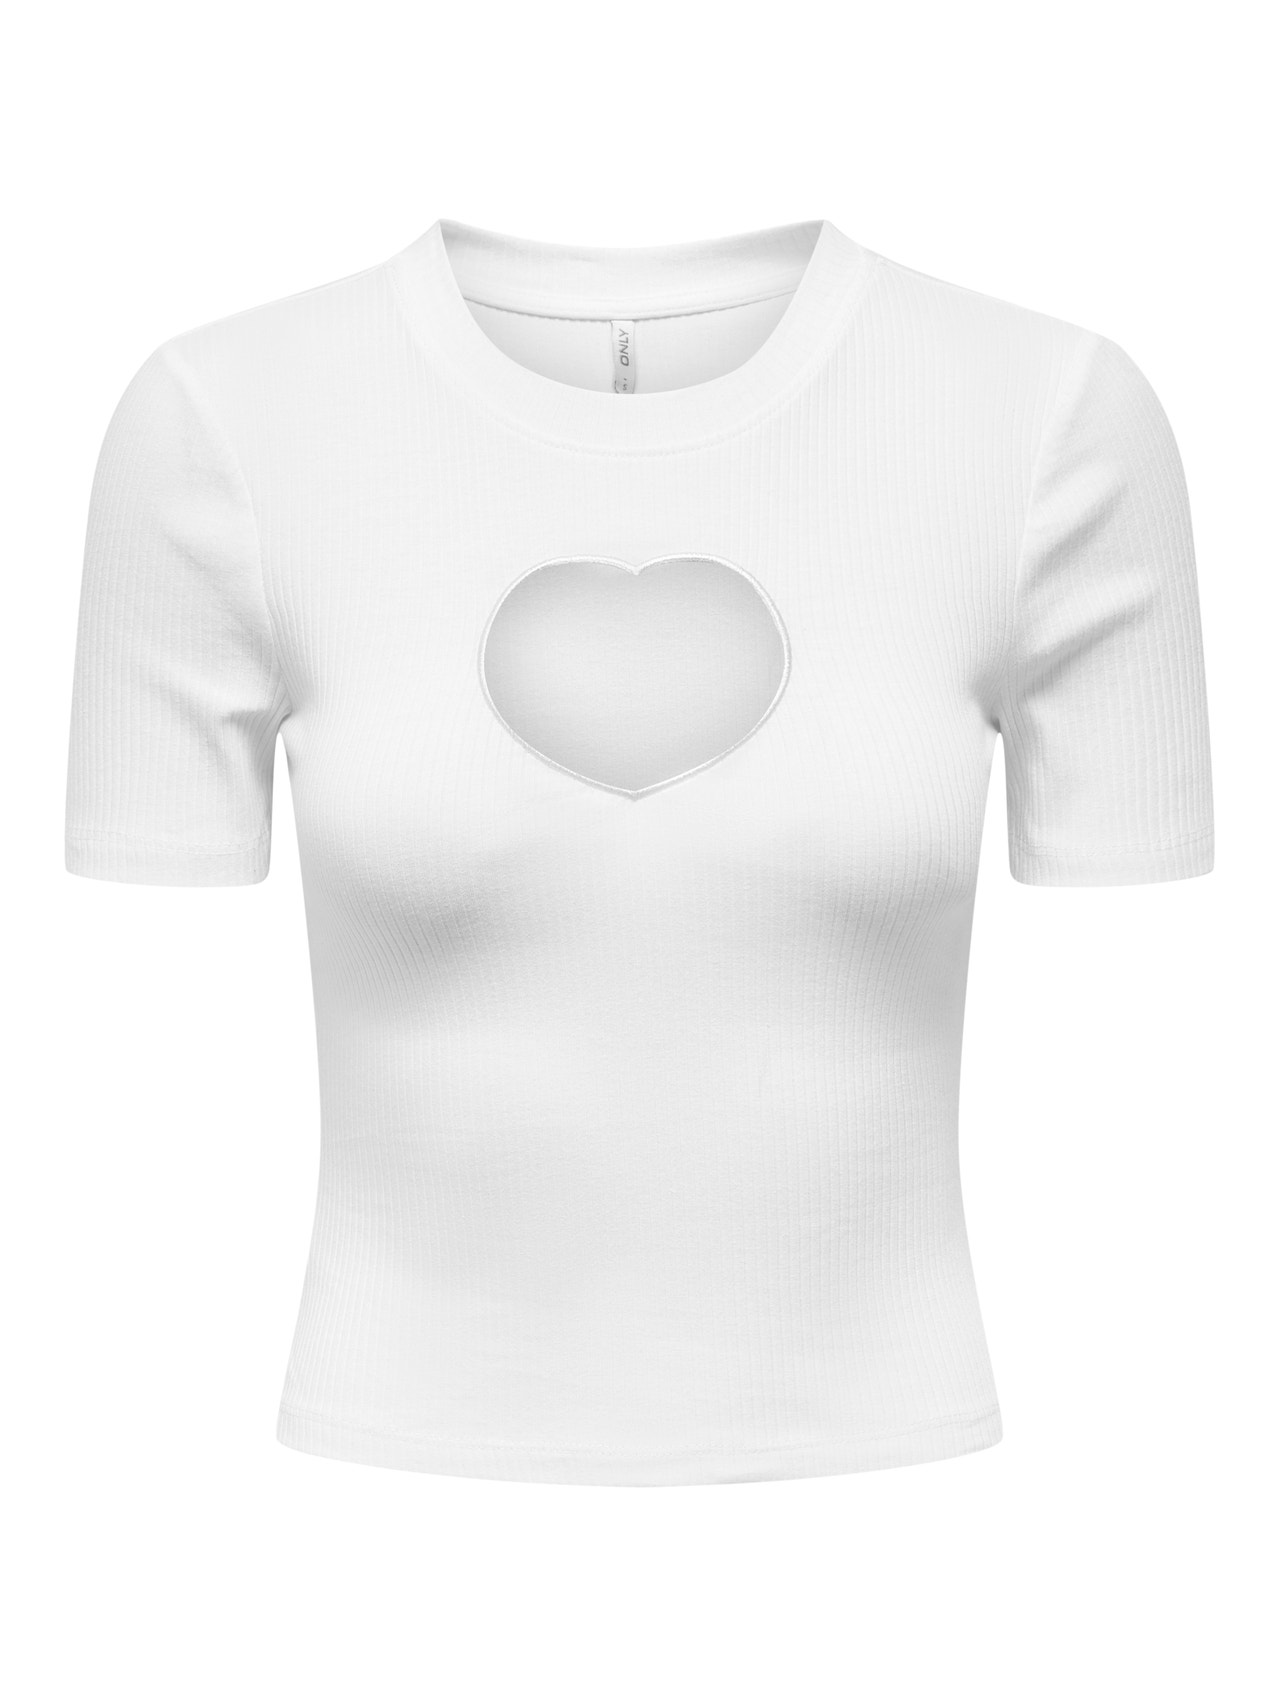 Heart Cut Out Top -  Canada